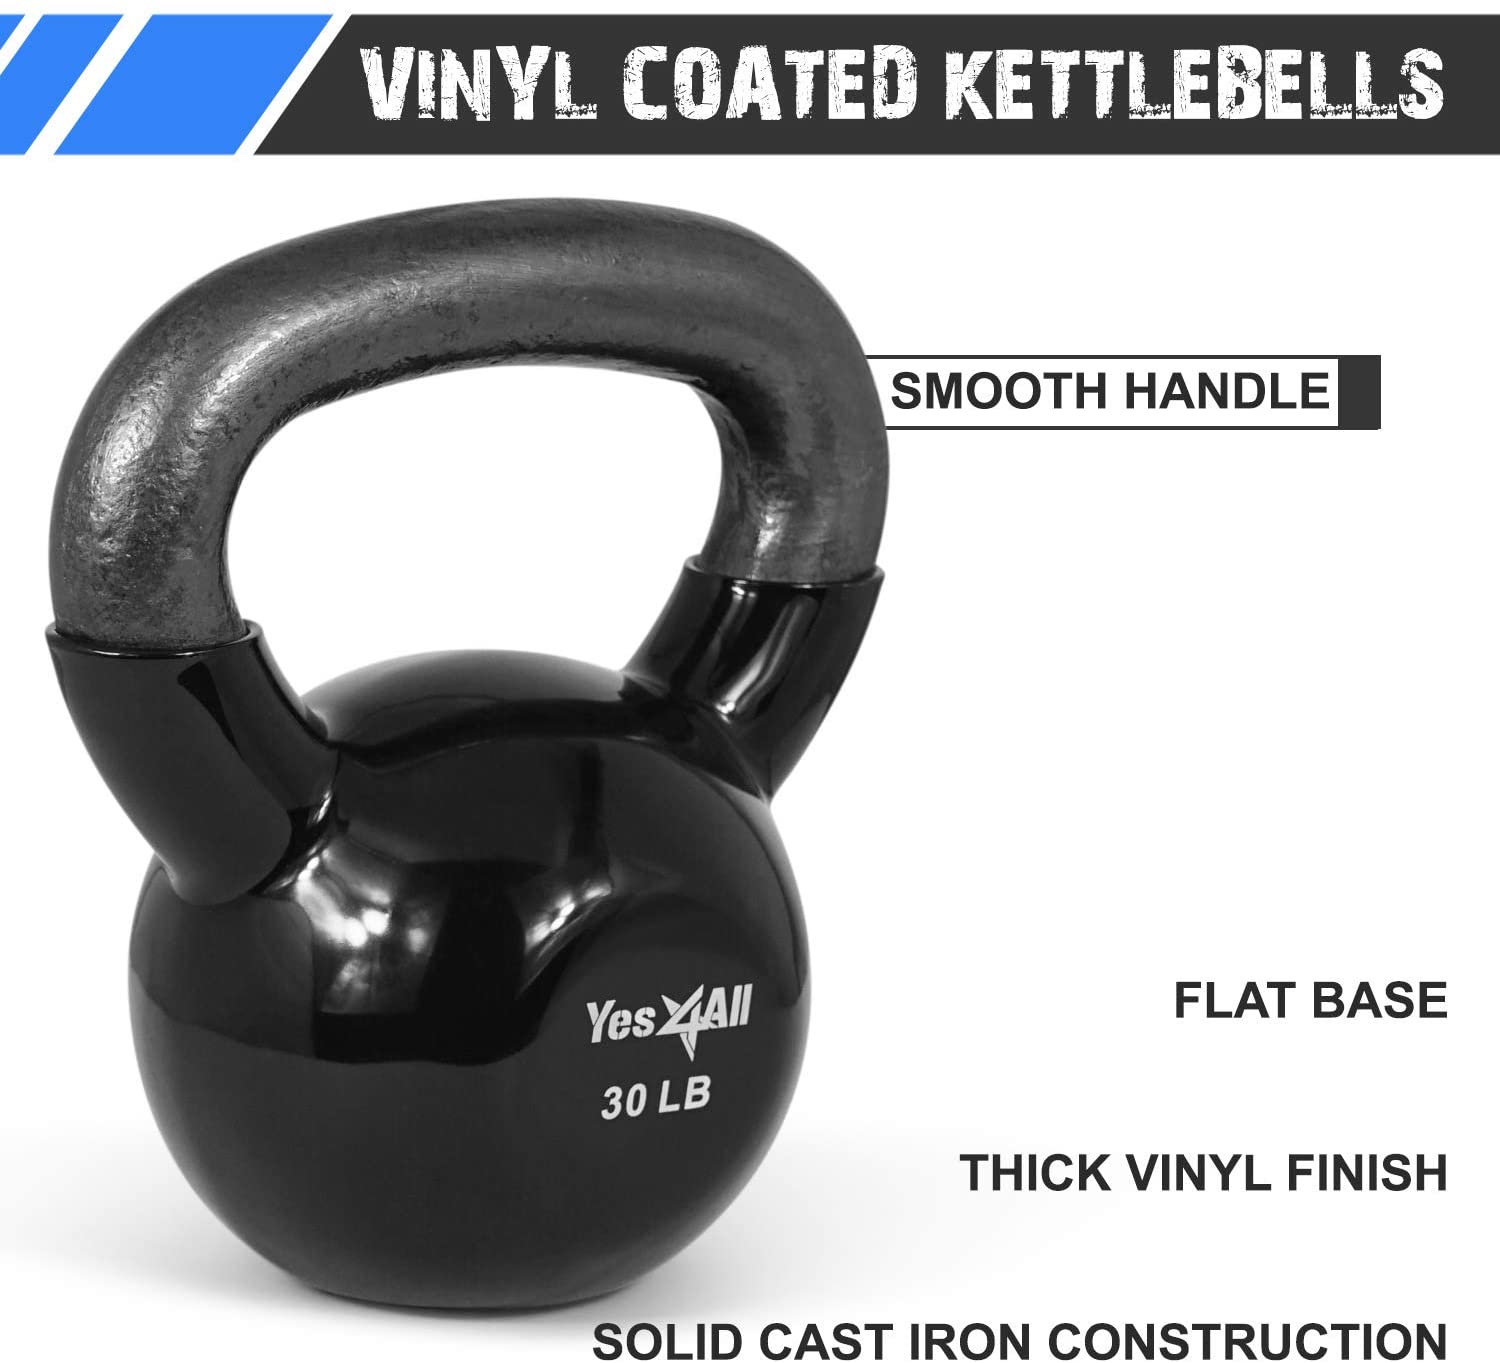 Yes4All 105 lb Vinyl Coated / PVC Kettlebell, Black, Combo / Set, Includes 5-30lb - image 5 of 8